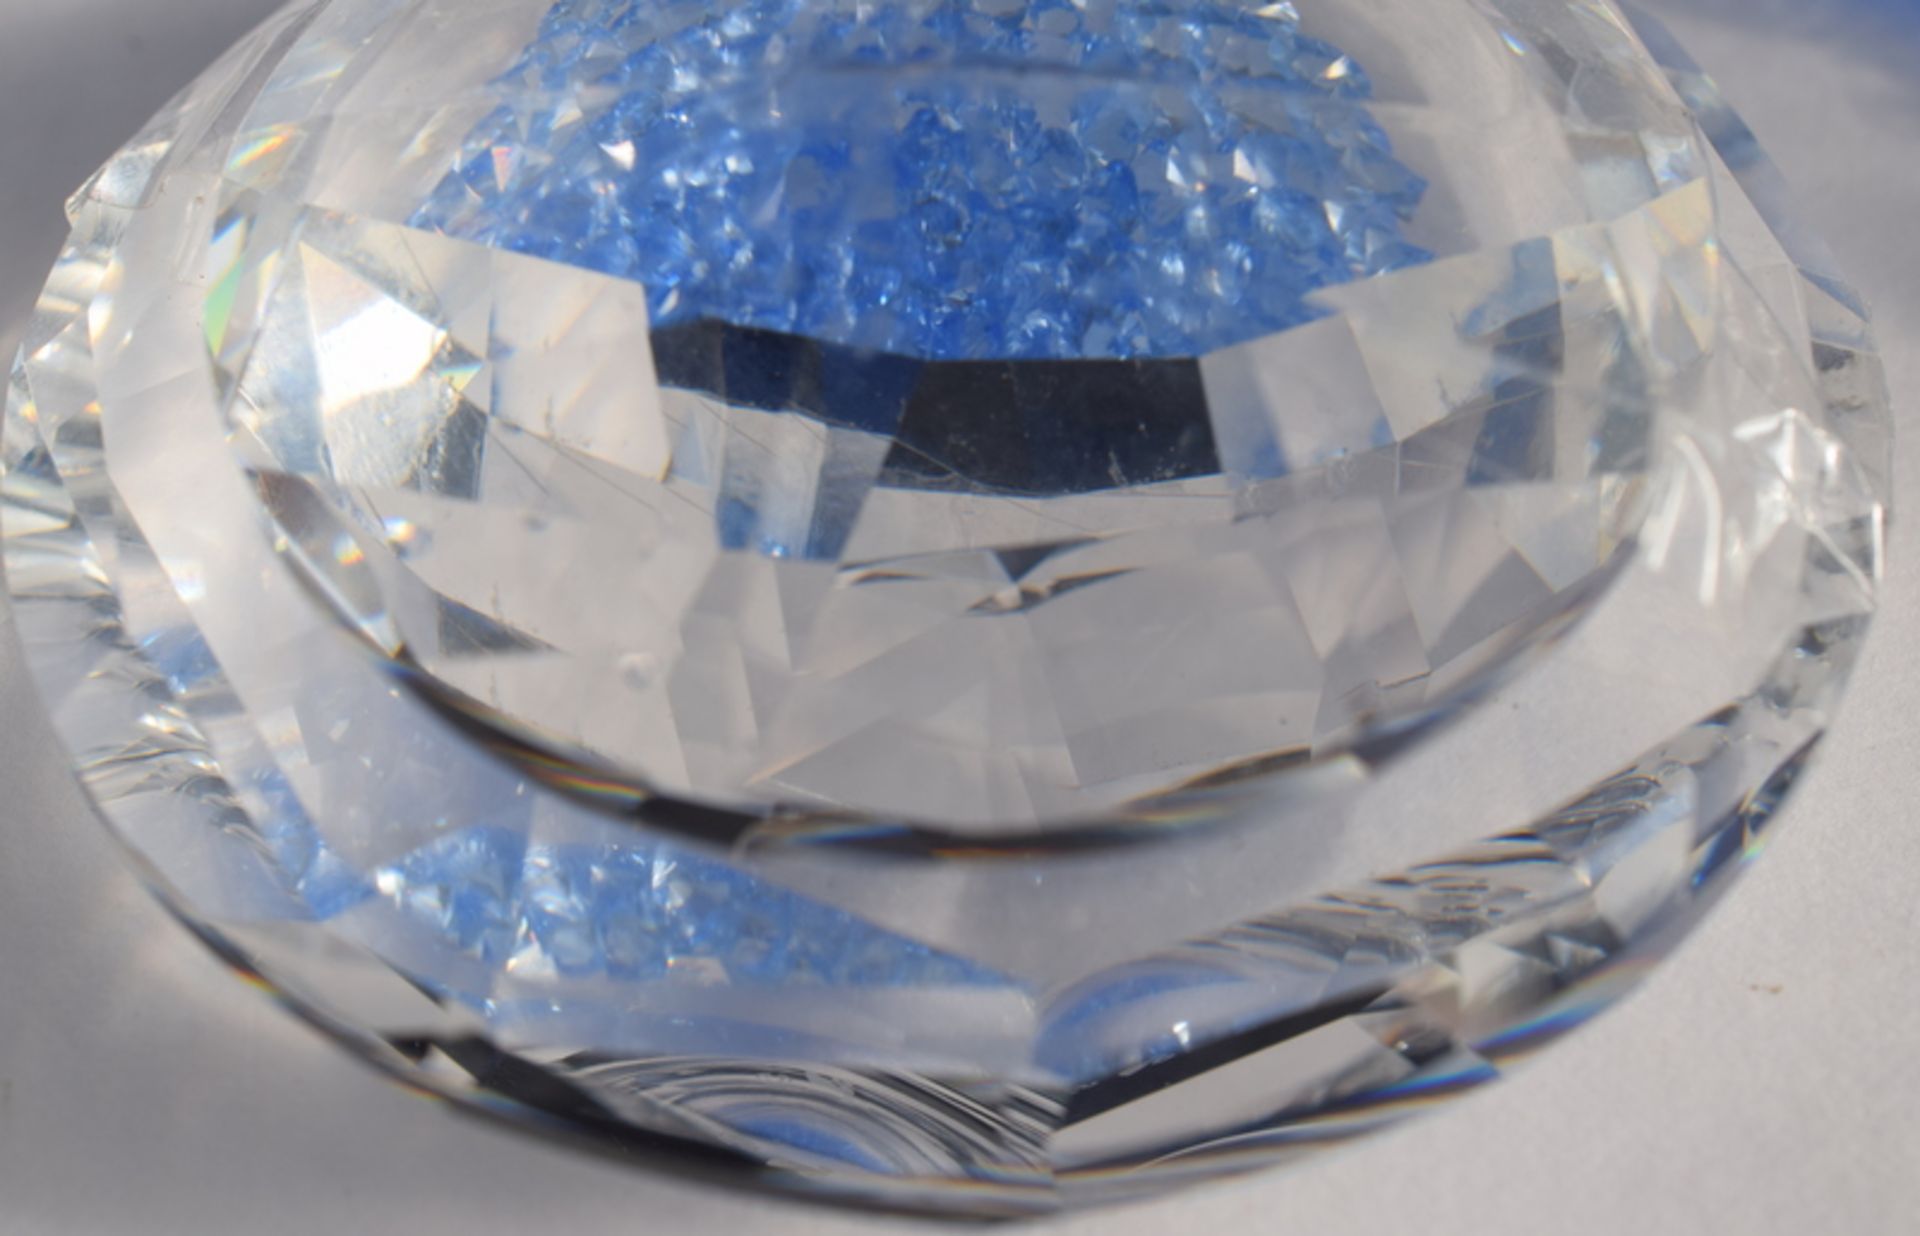 Swarovski Lidded Container With Blue Crystals - Image 3 of 4